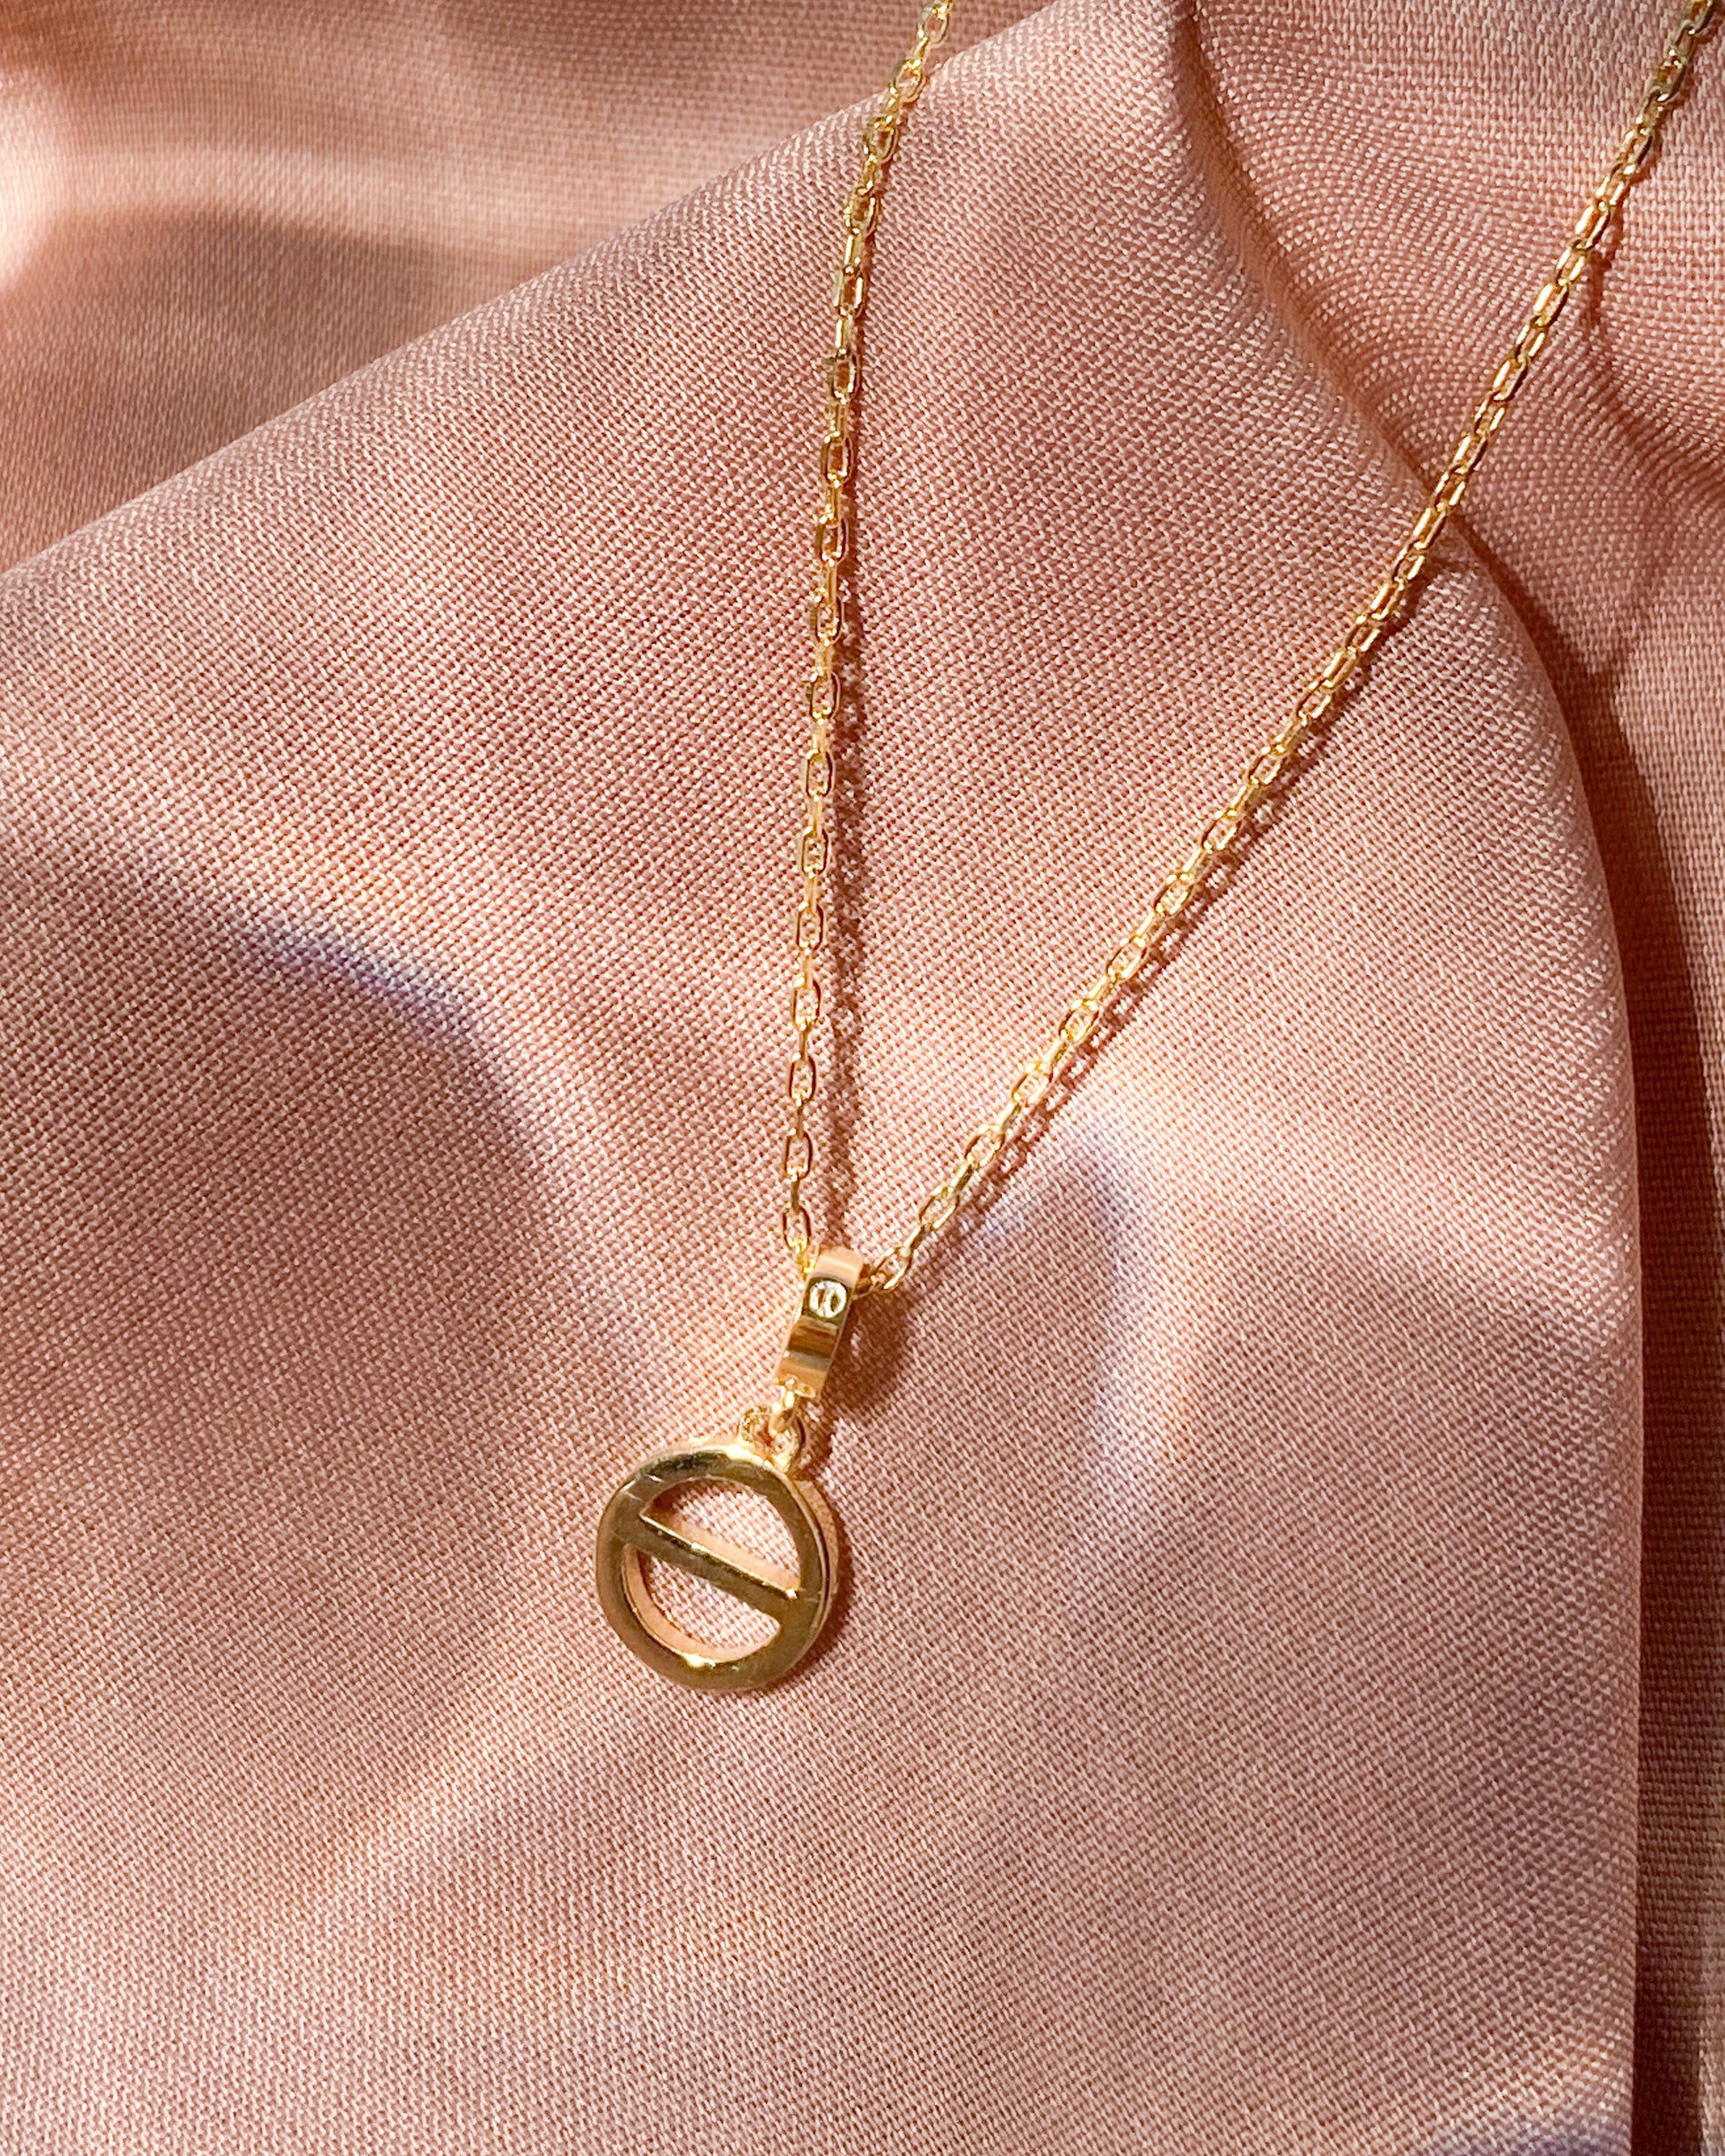 Delicate gold necklace Gold plated chain necklace with charm freeshipping - Ollijewelry